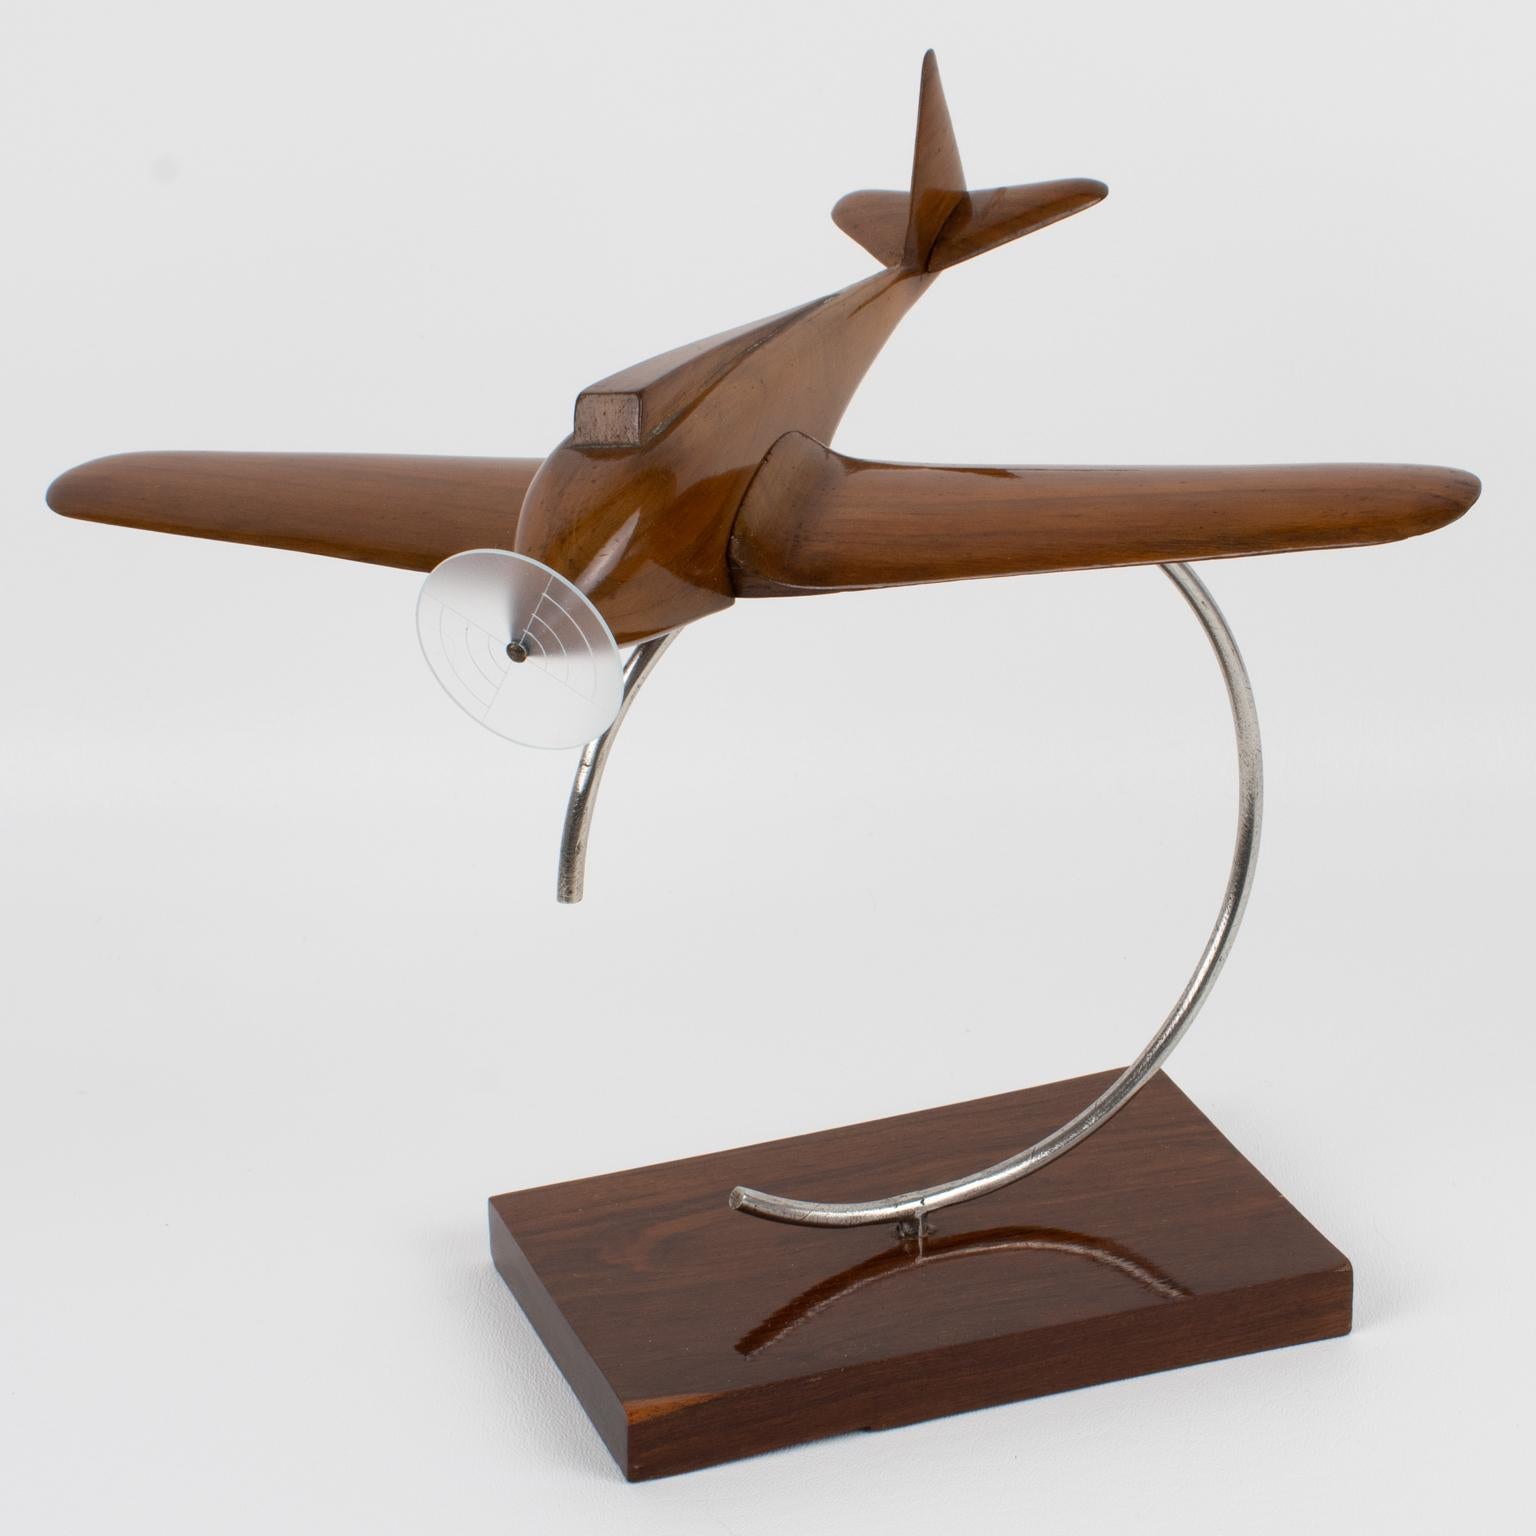 Stylish Art Deco wooden airplane model mounted on a geometric wood and metal display. This Art Deco model airplane is in solid wood with a lovely warm patina. It has one large Lucite propeller (note the original propeller was probably from a